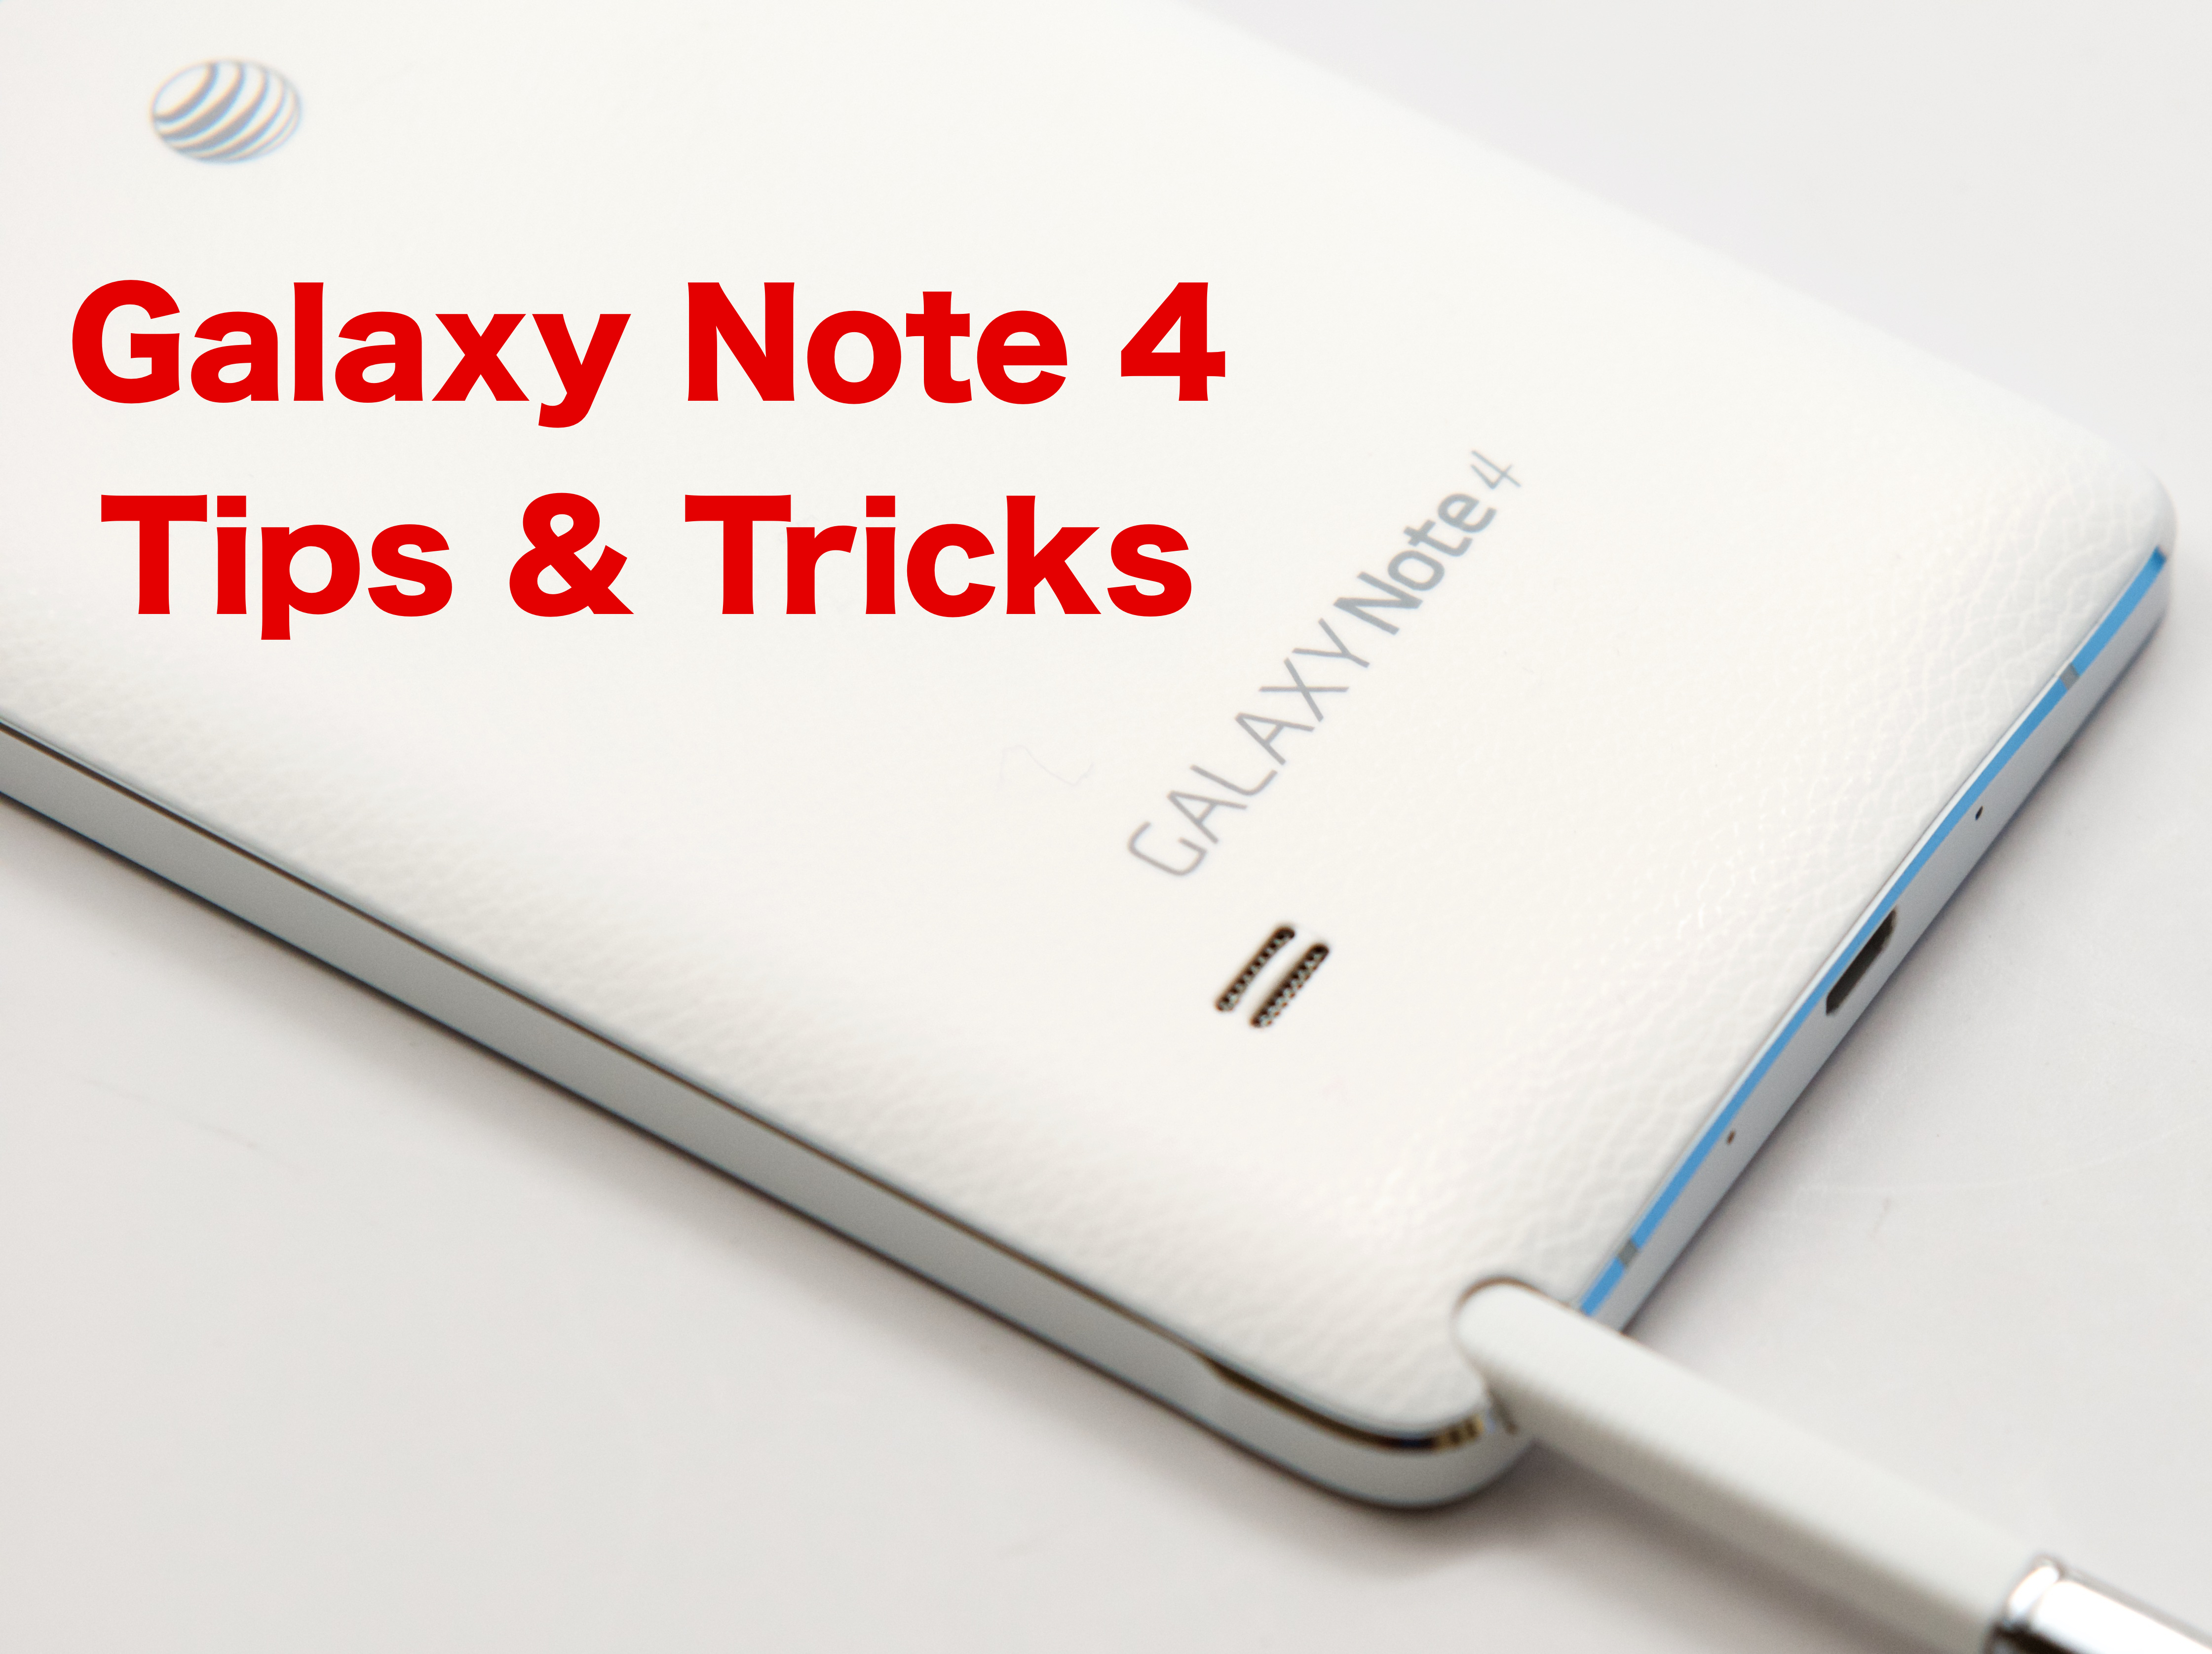 Use these Galaxy Note 4 tips and tricks to get help with popular Note 4 features.